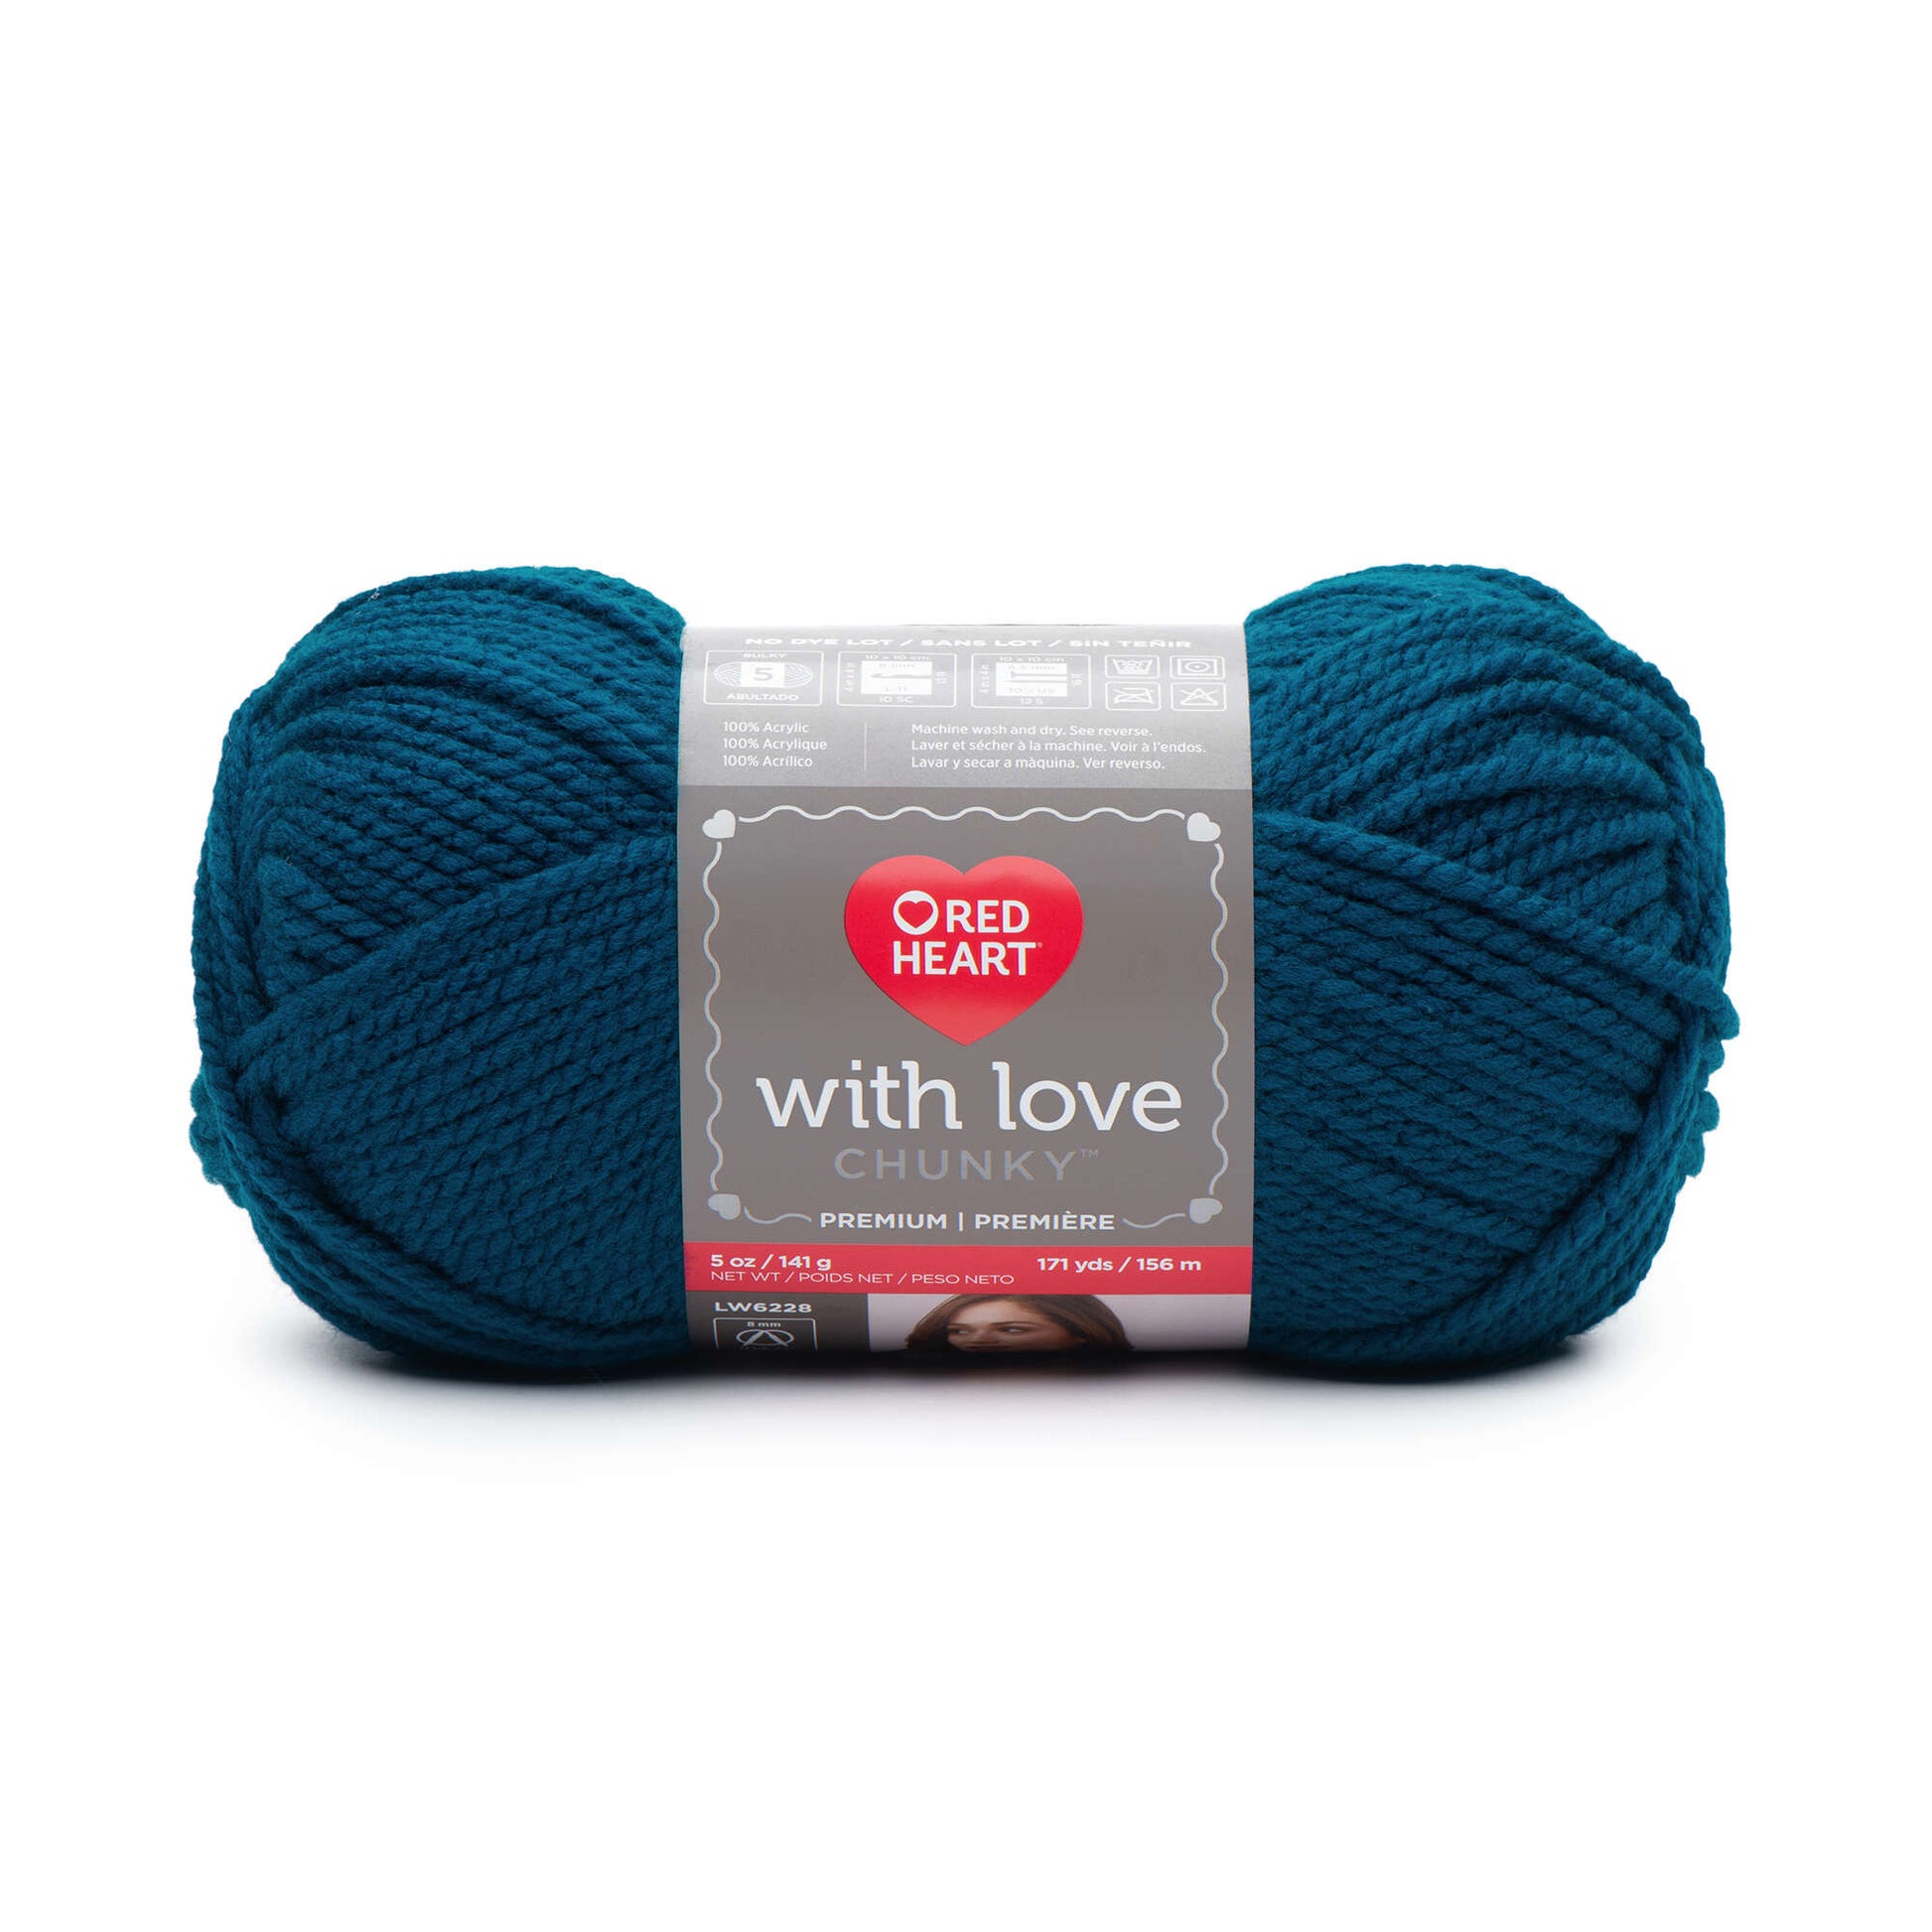 Red Heart With Love Chunky Yarn - Discontinued shades Peacock